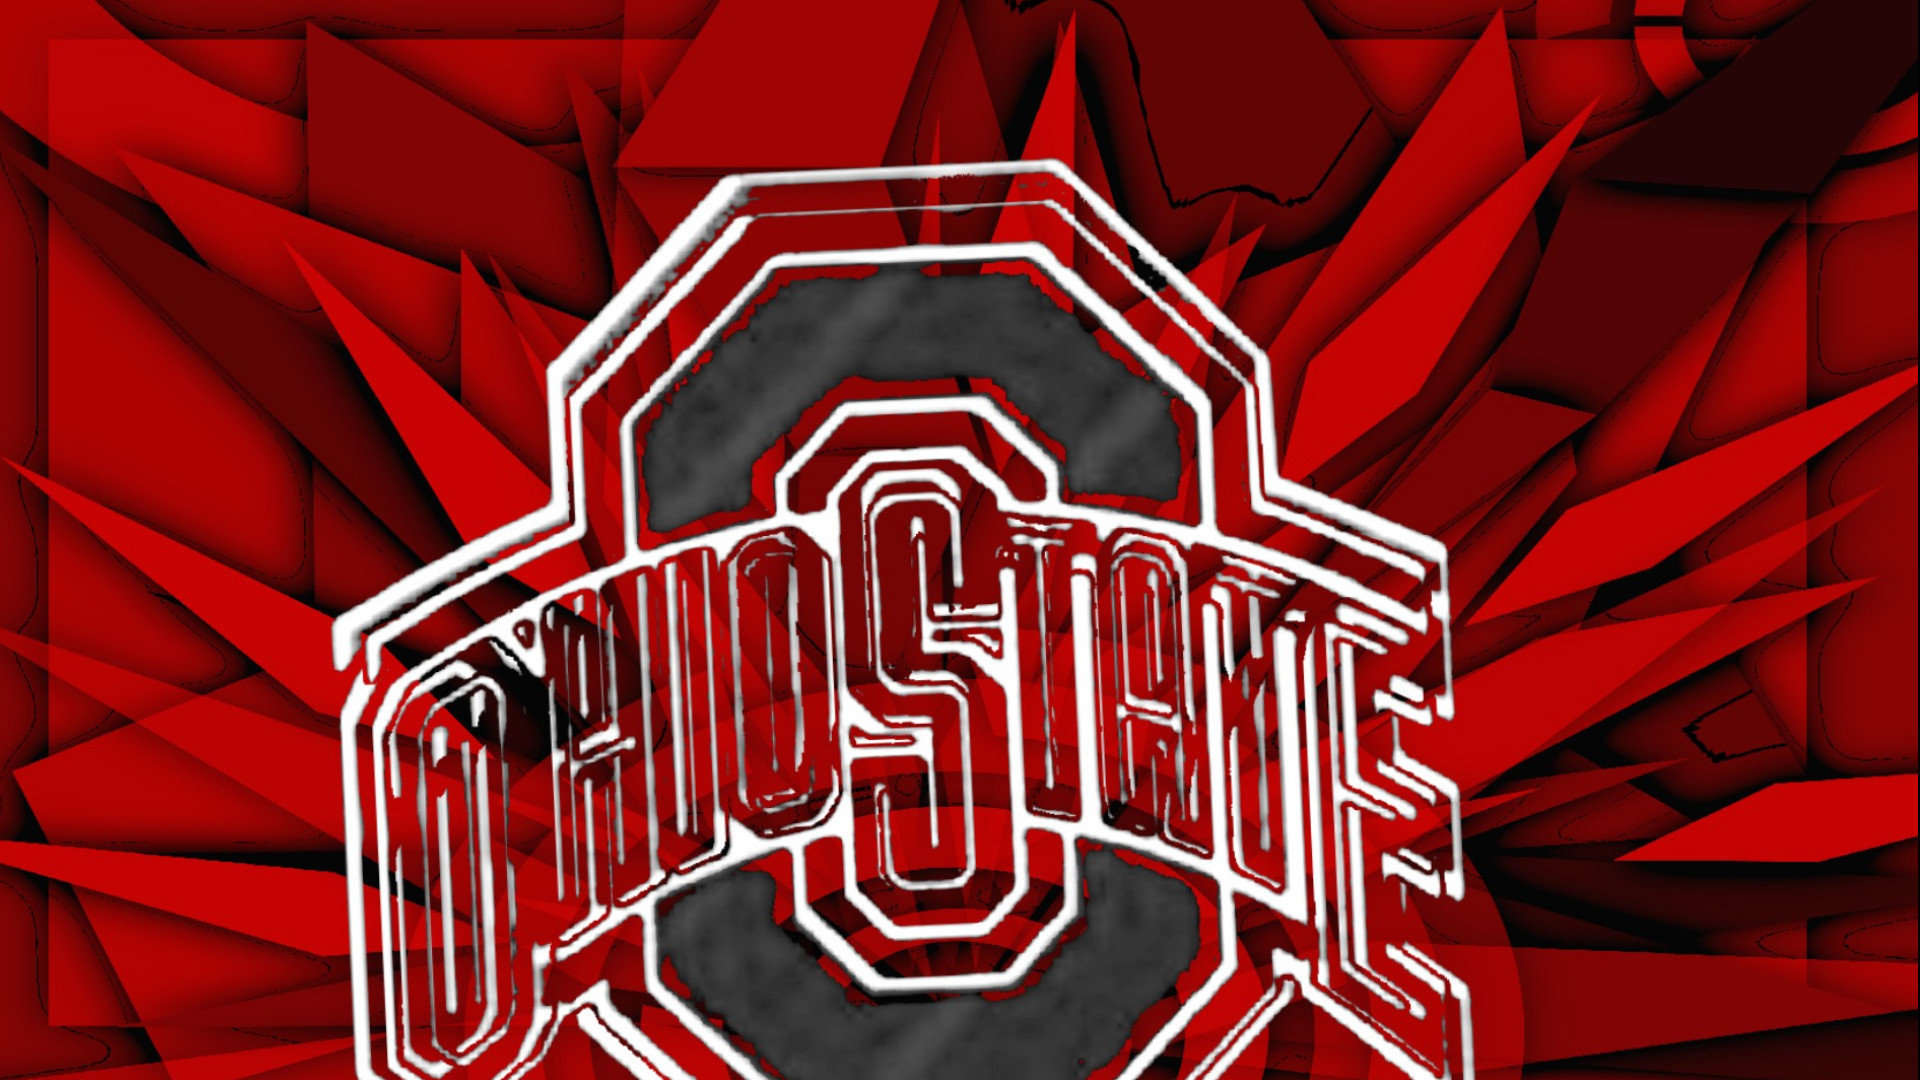 1920x1080 Ohio State Buckeyes images OHIO STATE GRAY BLOCK O HD wallpaper and  background photos